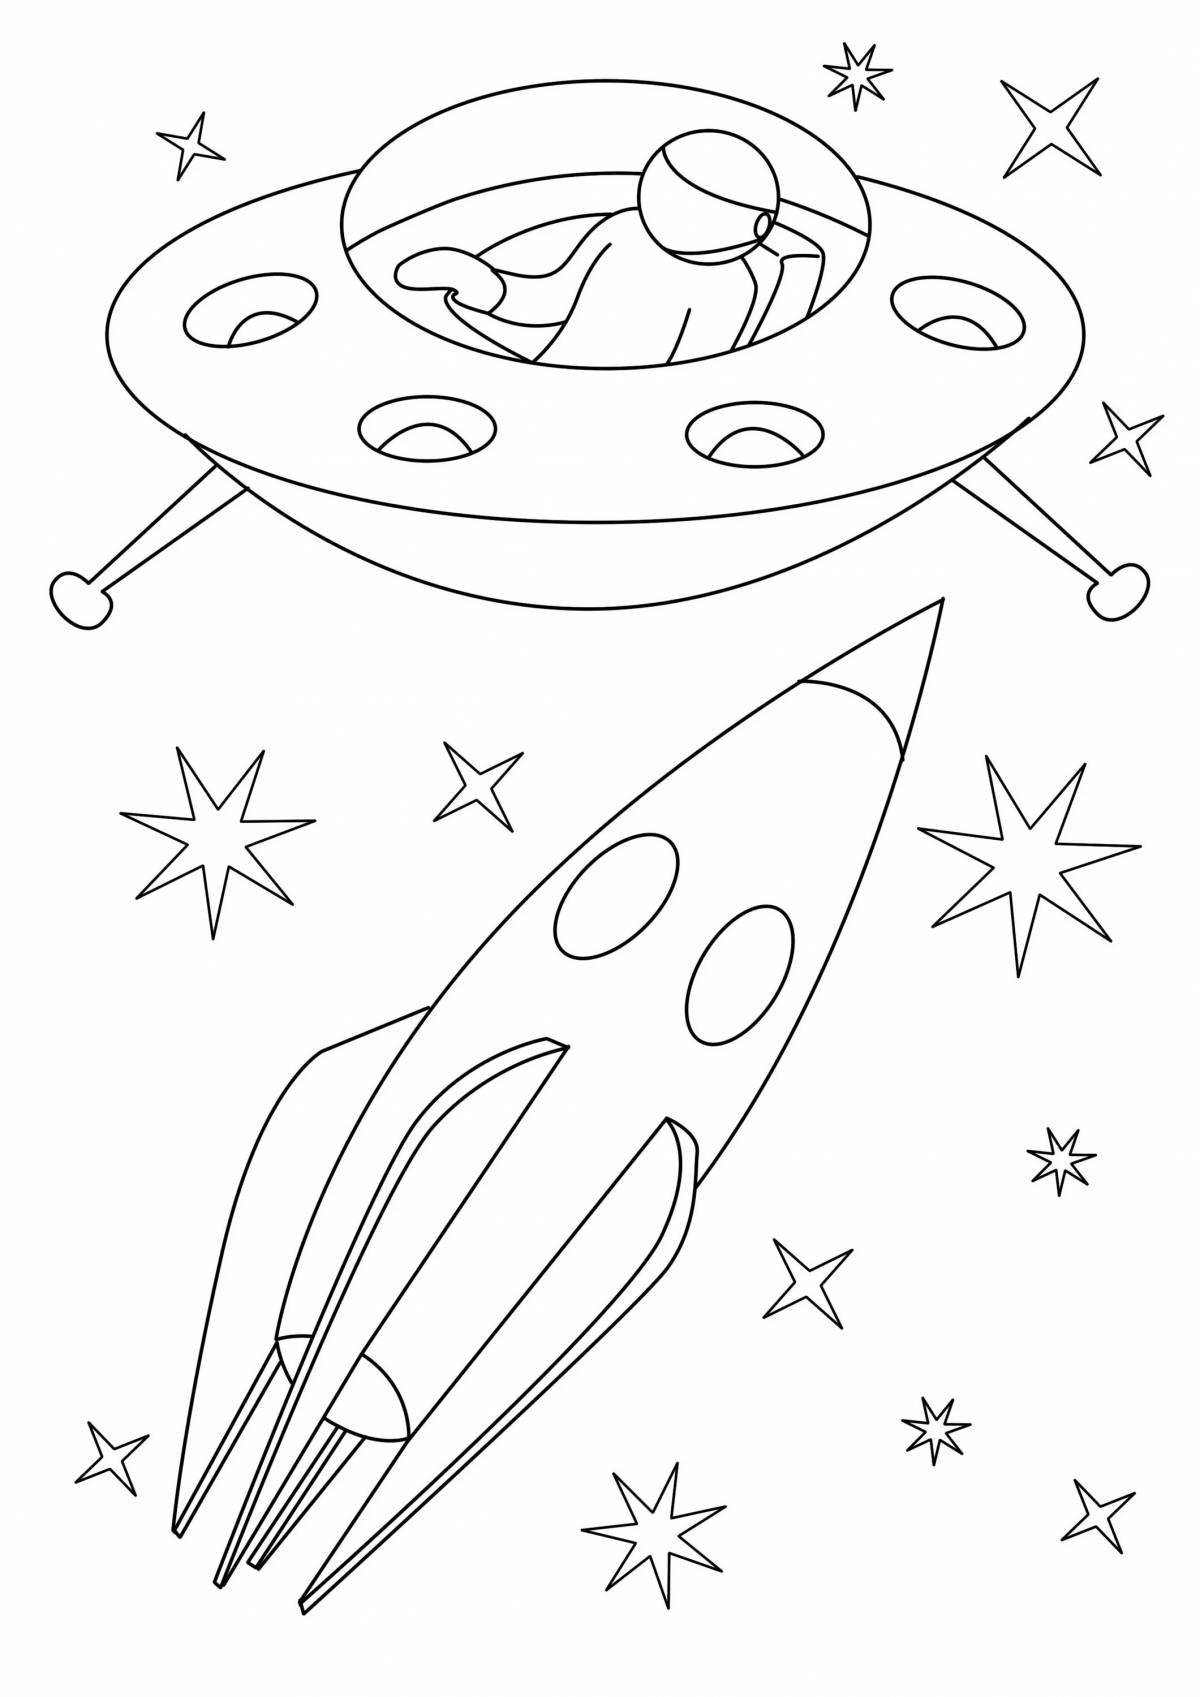 Exquisite space rocket coloring page